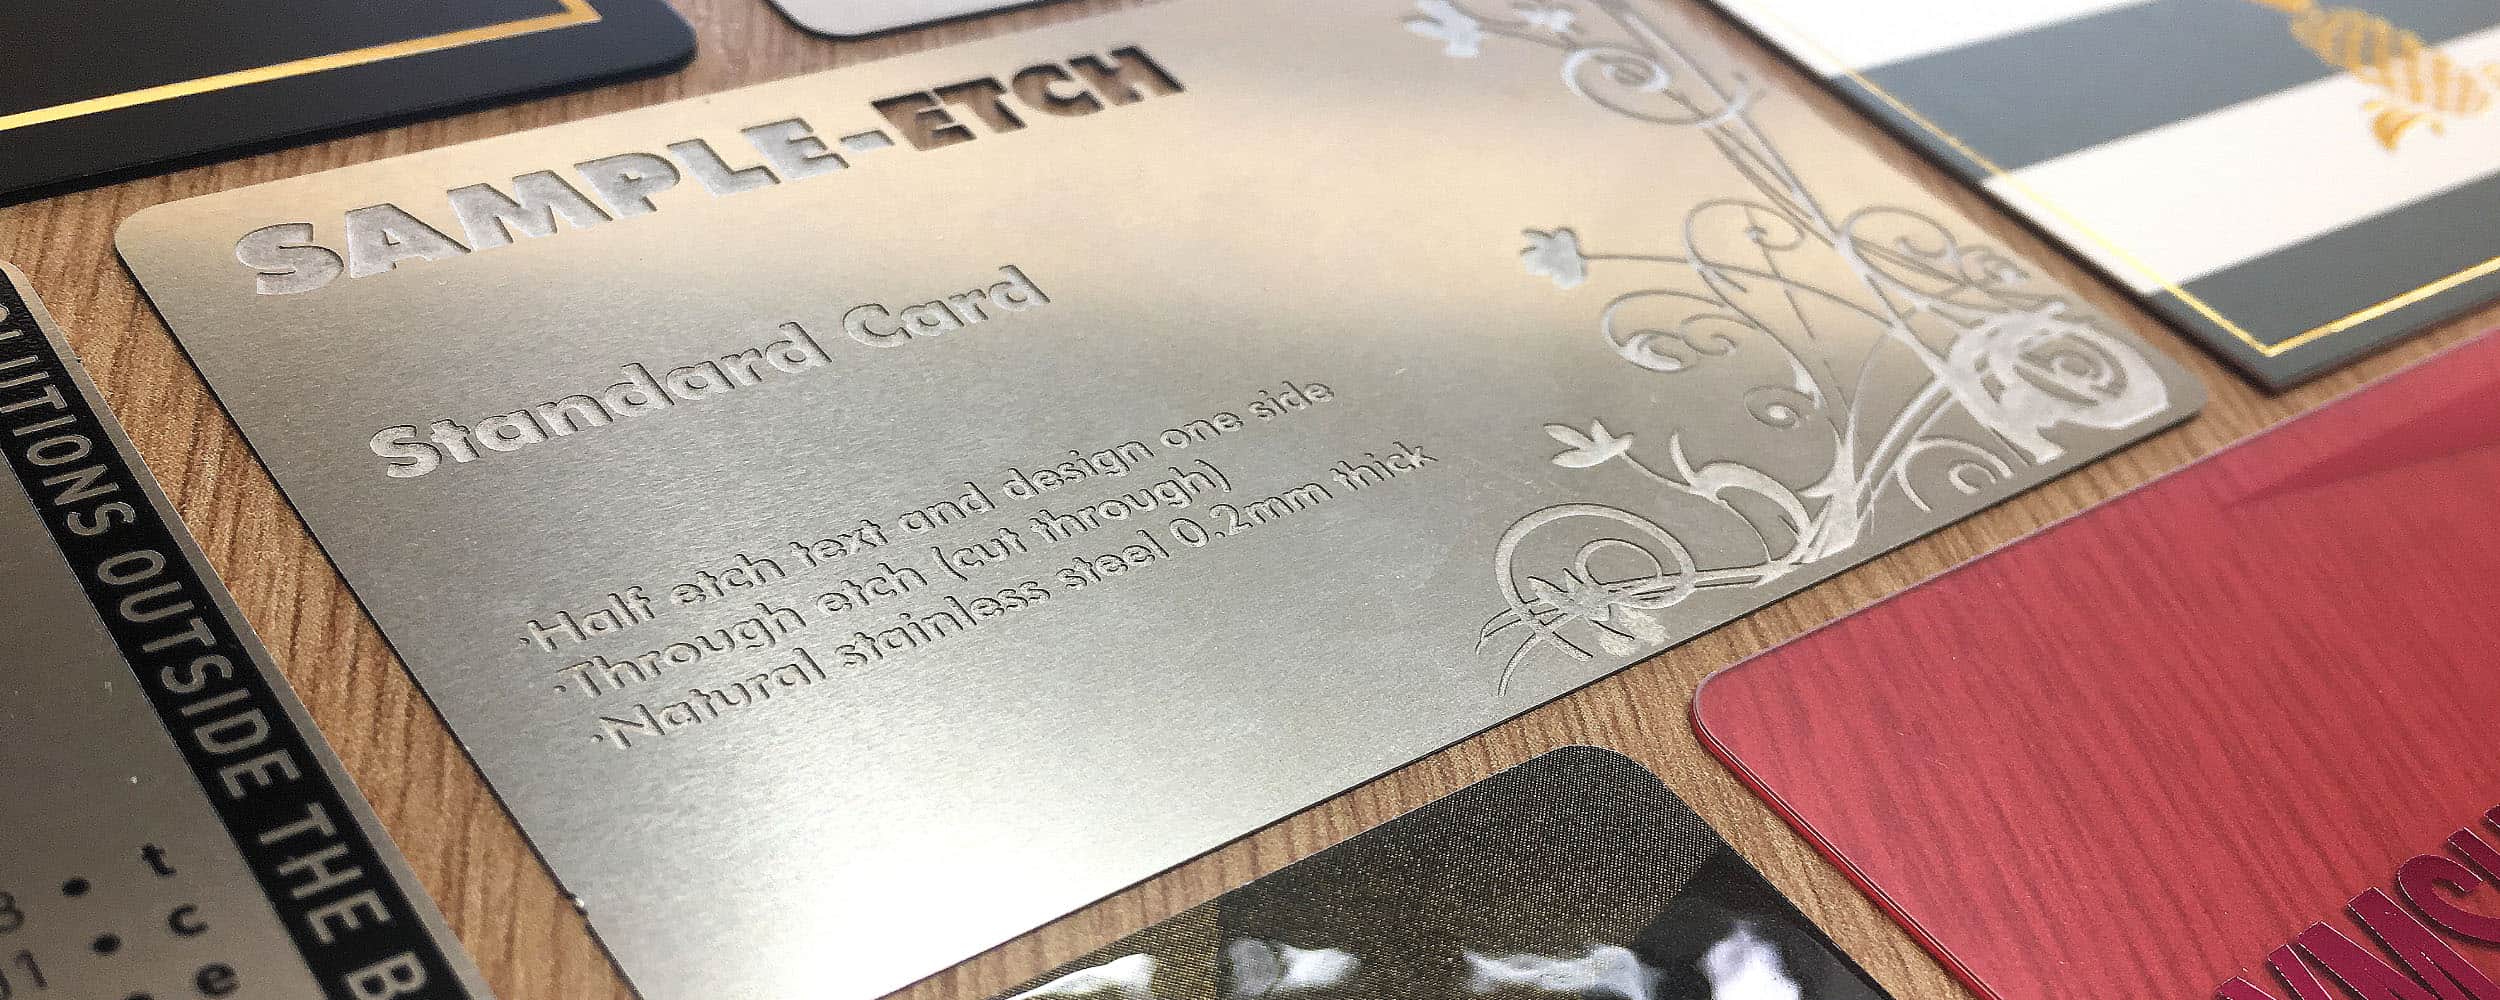 Custom metal business card with engraved design